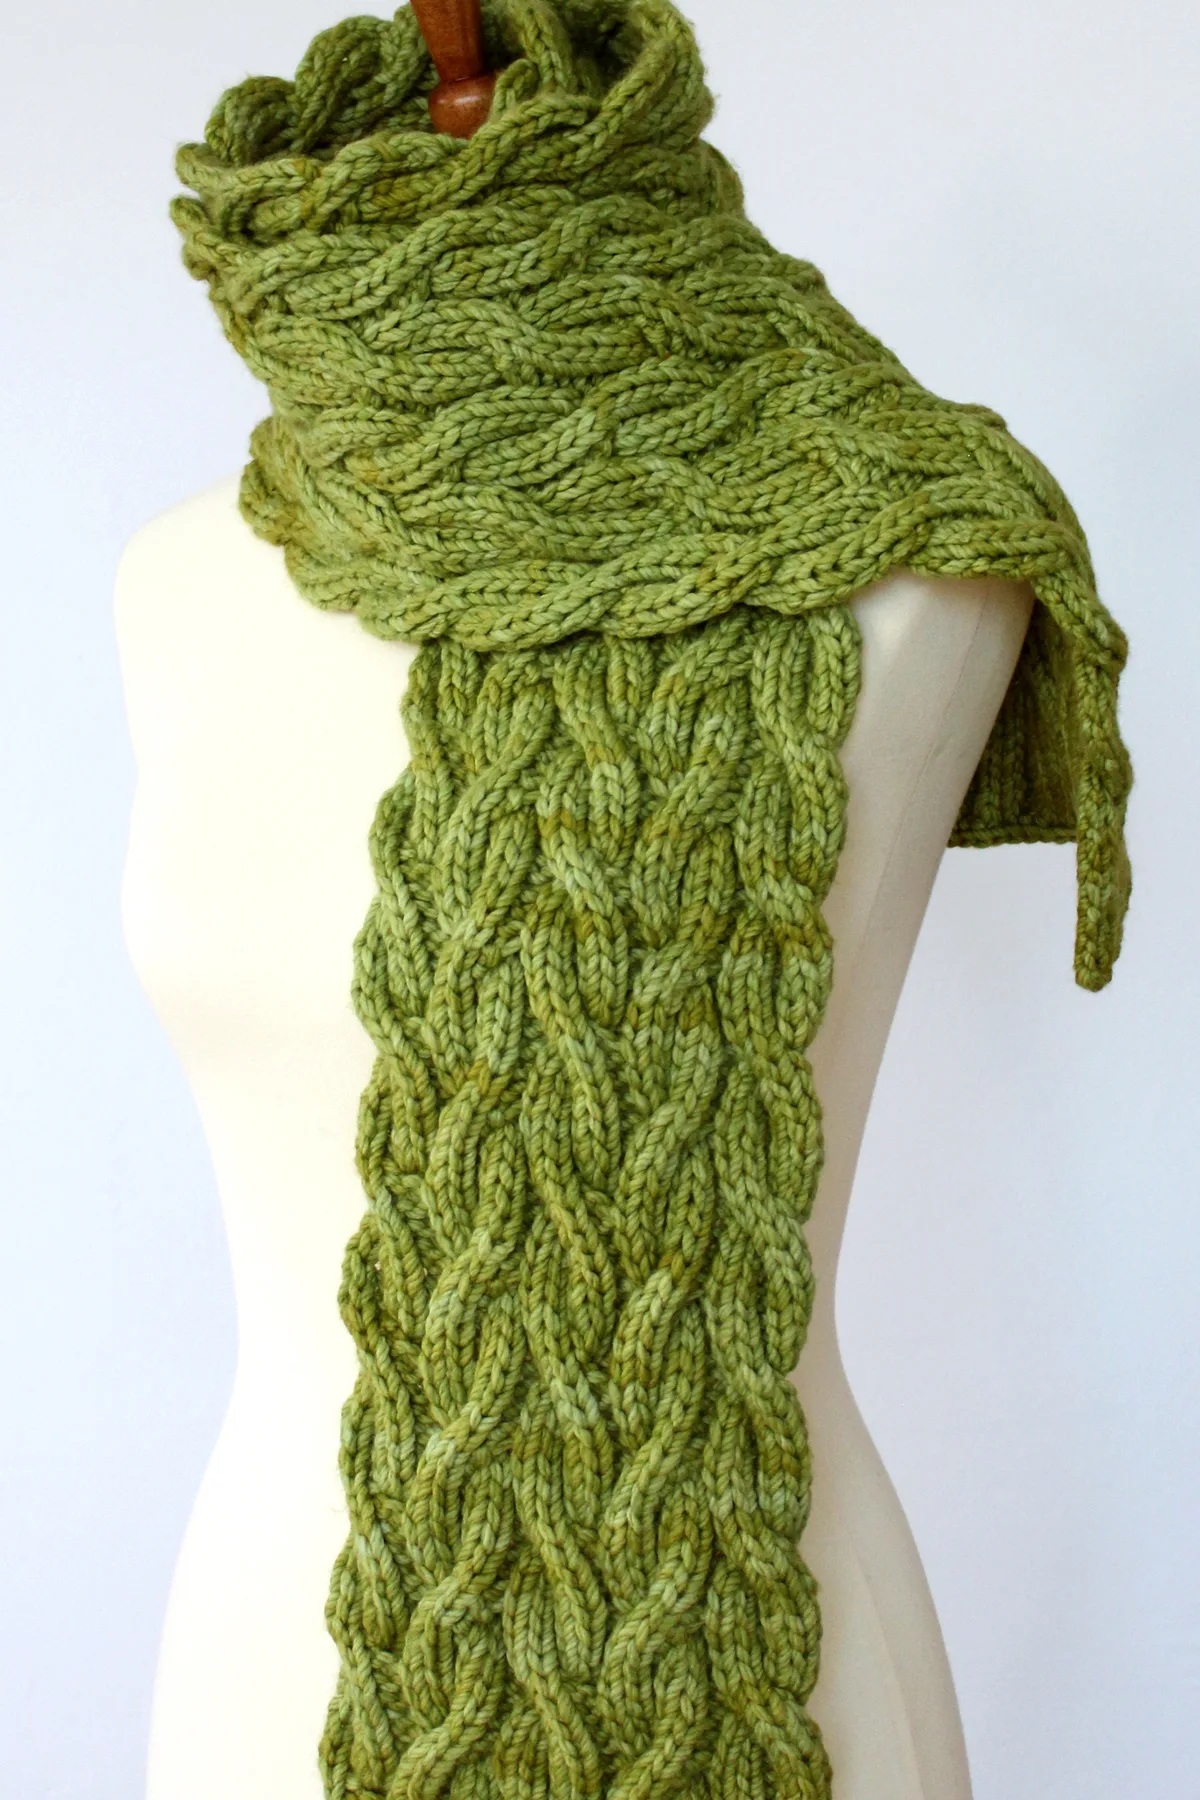 Reversible Cable Scarf in green yarn designed by Studio Knit.